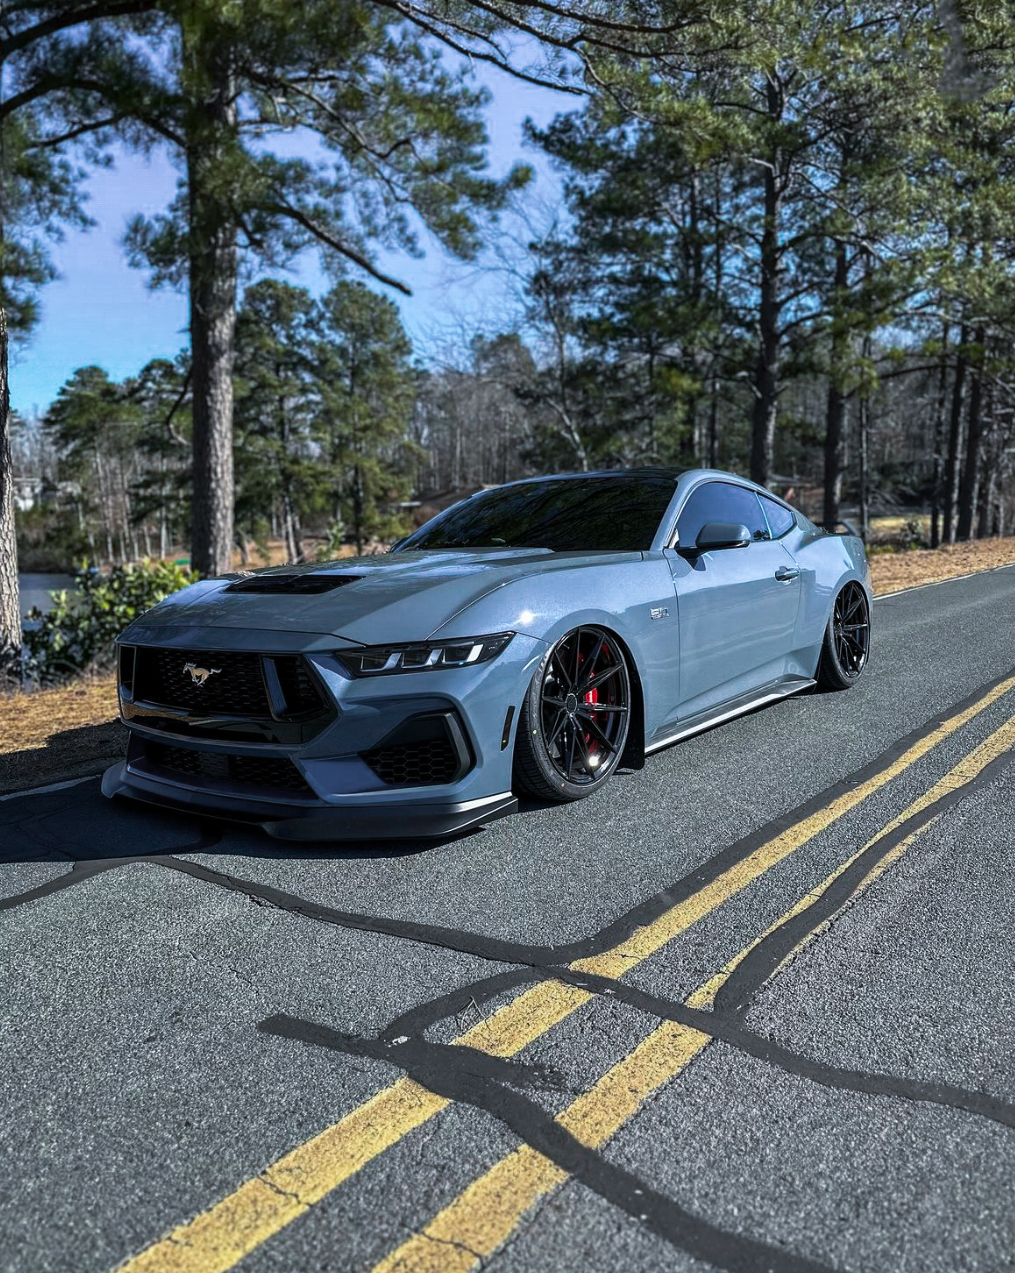 S650 Mustang Blaque Diamond BD-F18 BD-D25 BD-F29 Flow Forged Series - Vibe Motorsports BAGG_STNG3